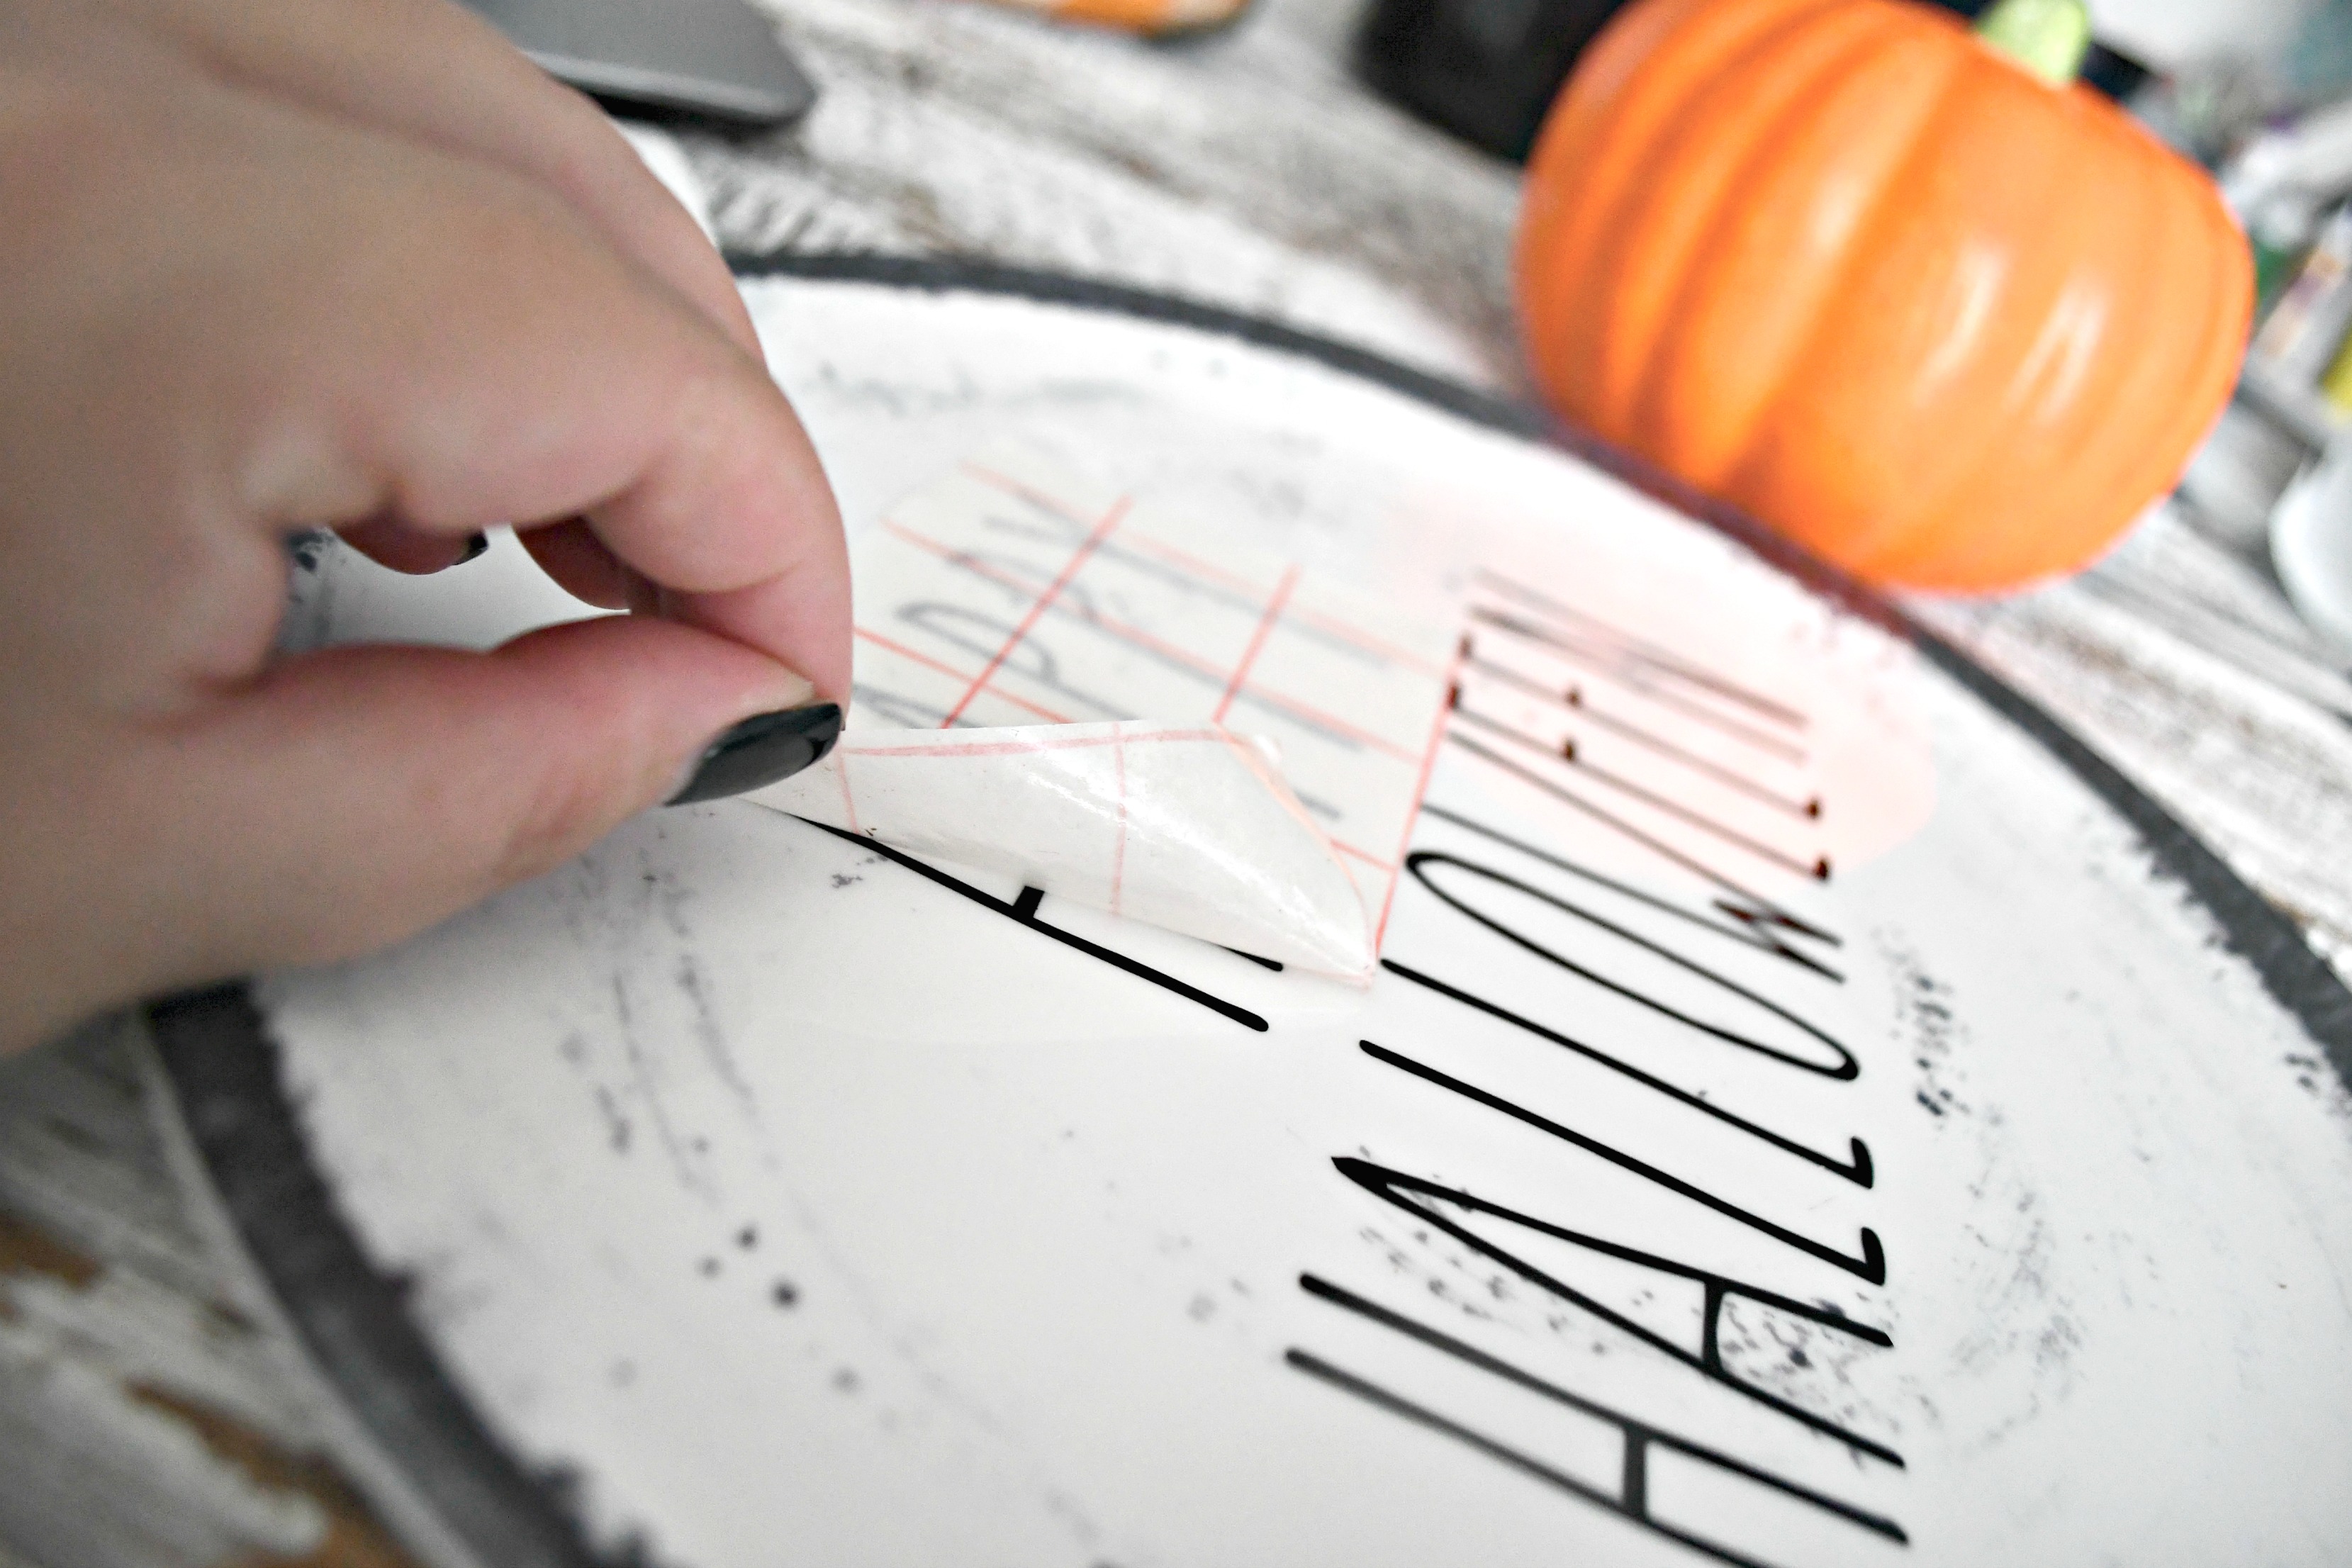 DIY Rae Dunn Inspired Halloween Decor - transferring the lettering to a plate